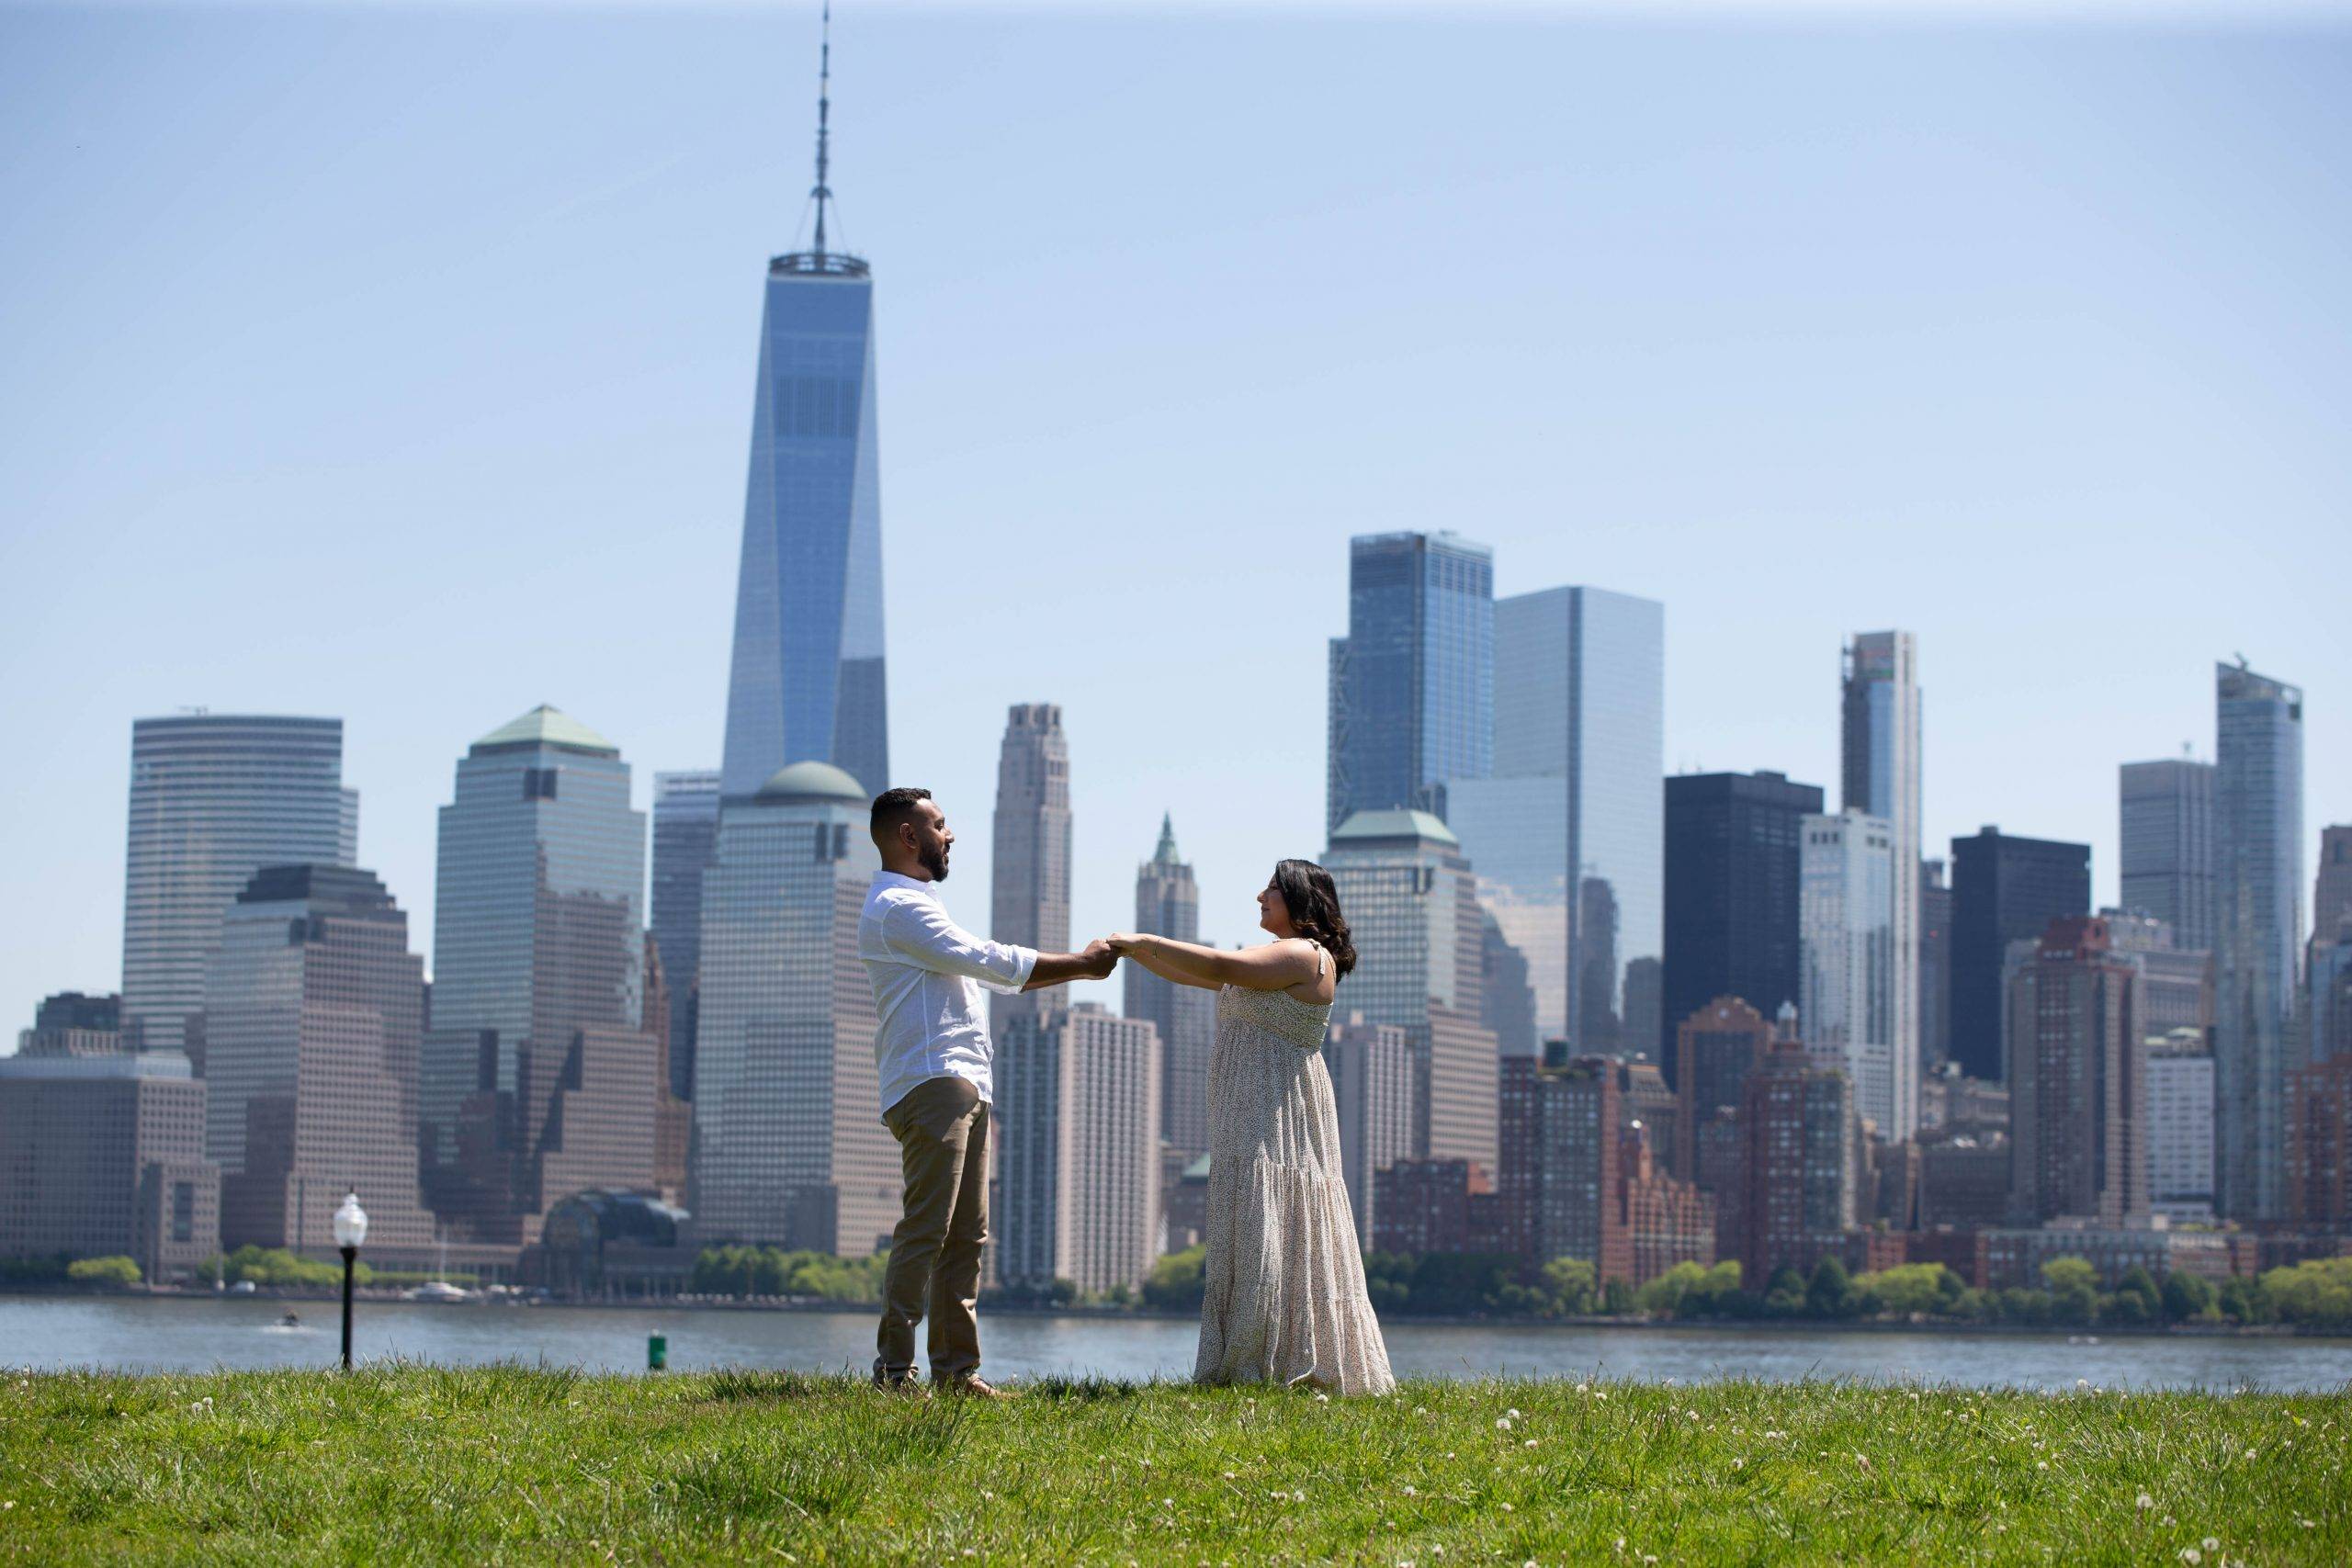 A man and woman standing in a field with a city skyline in the background.